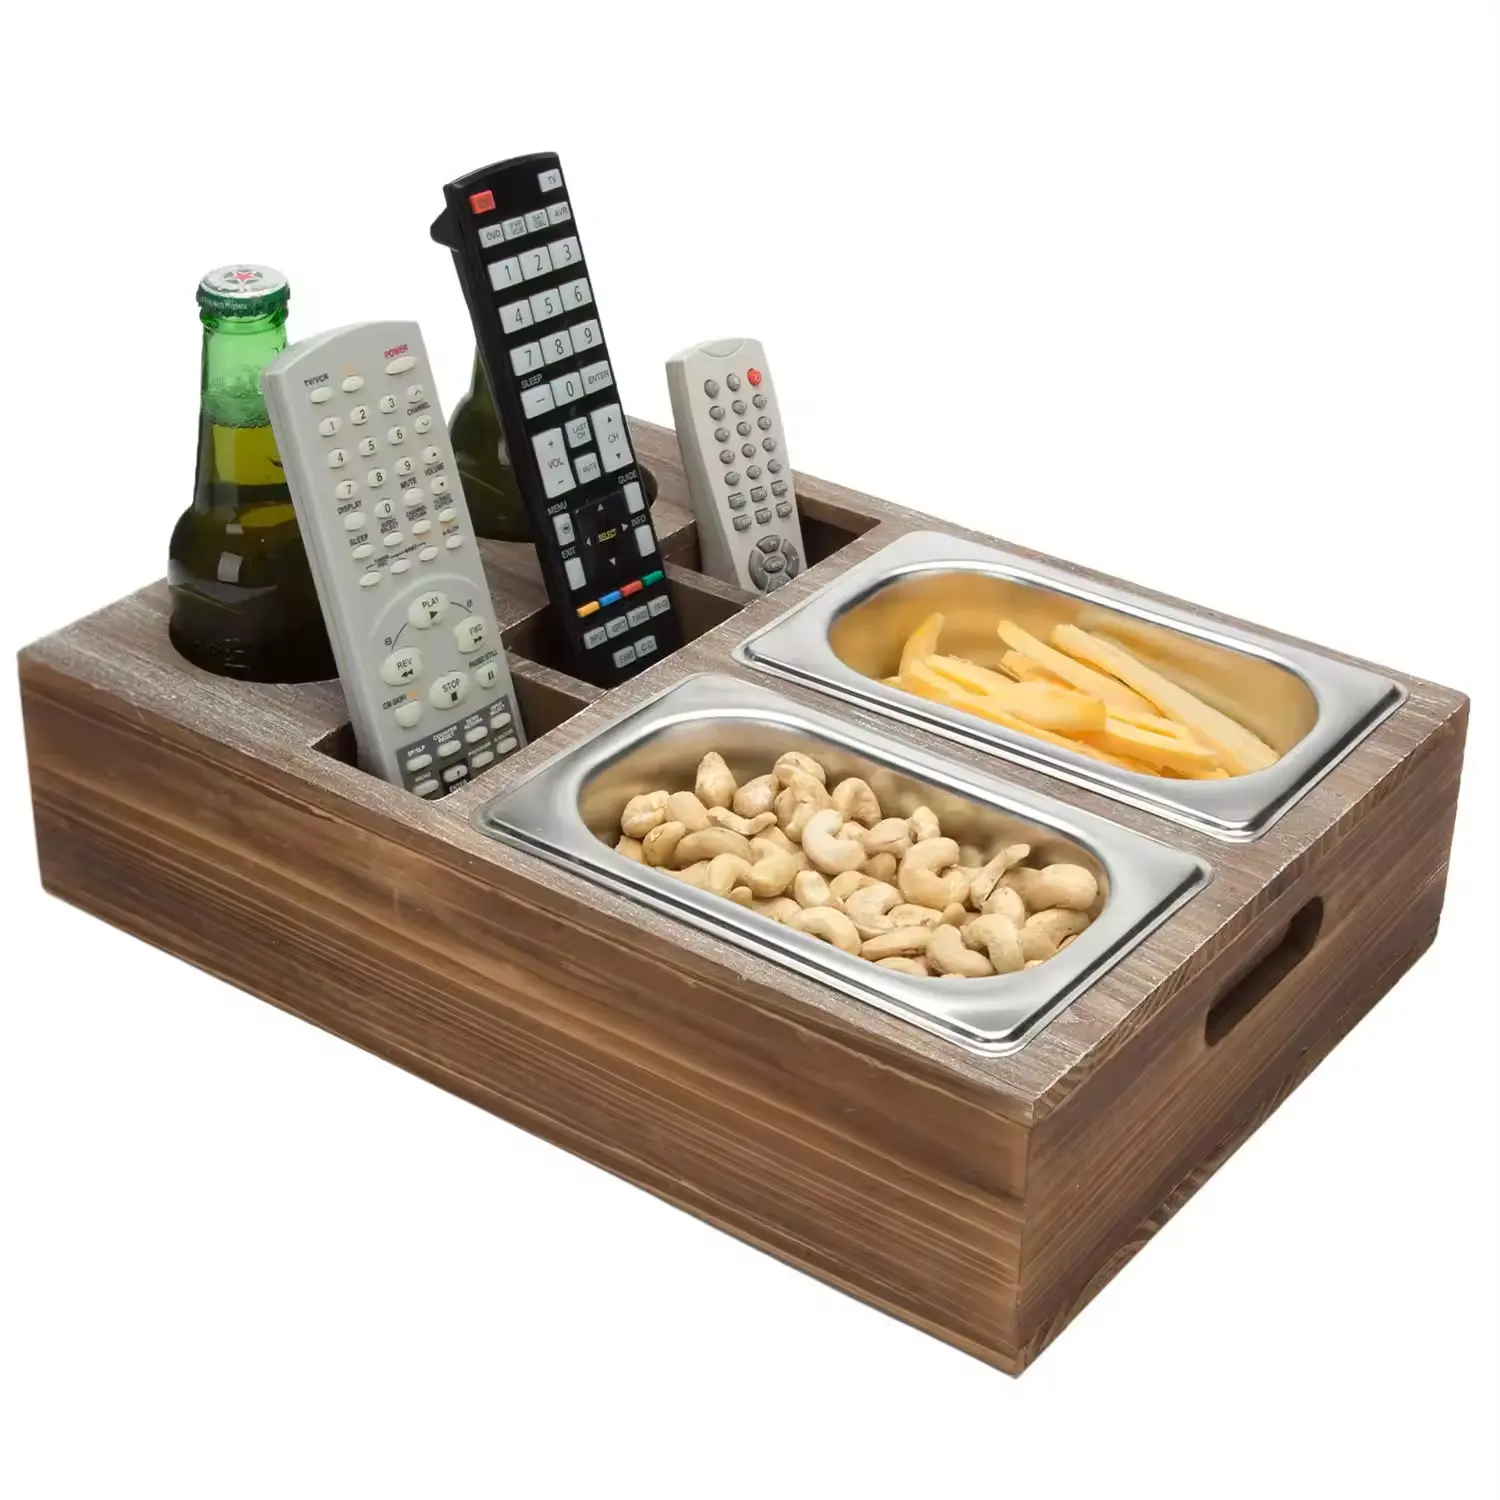 Hot Sales Wooden Sofa Tray 2 Drink Cup Holders 3 Remote Control Holder Slots Rustic Brown Wood Couch Snack Caddy Tray